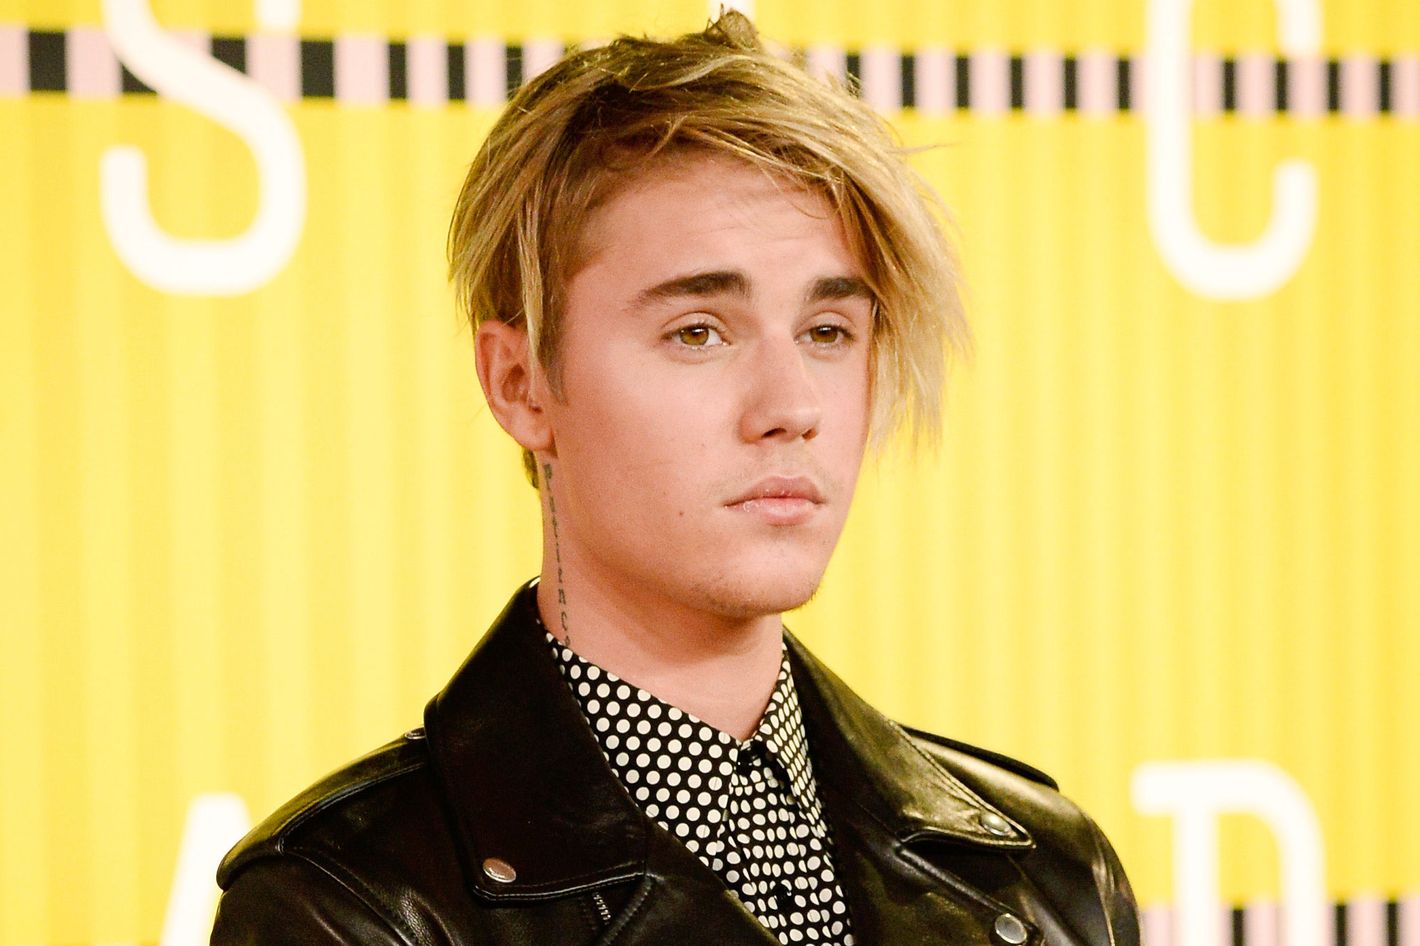 Justin Bieber's New Hair Is Making His Fans Nauseous